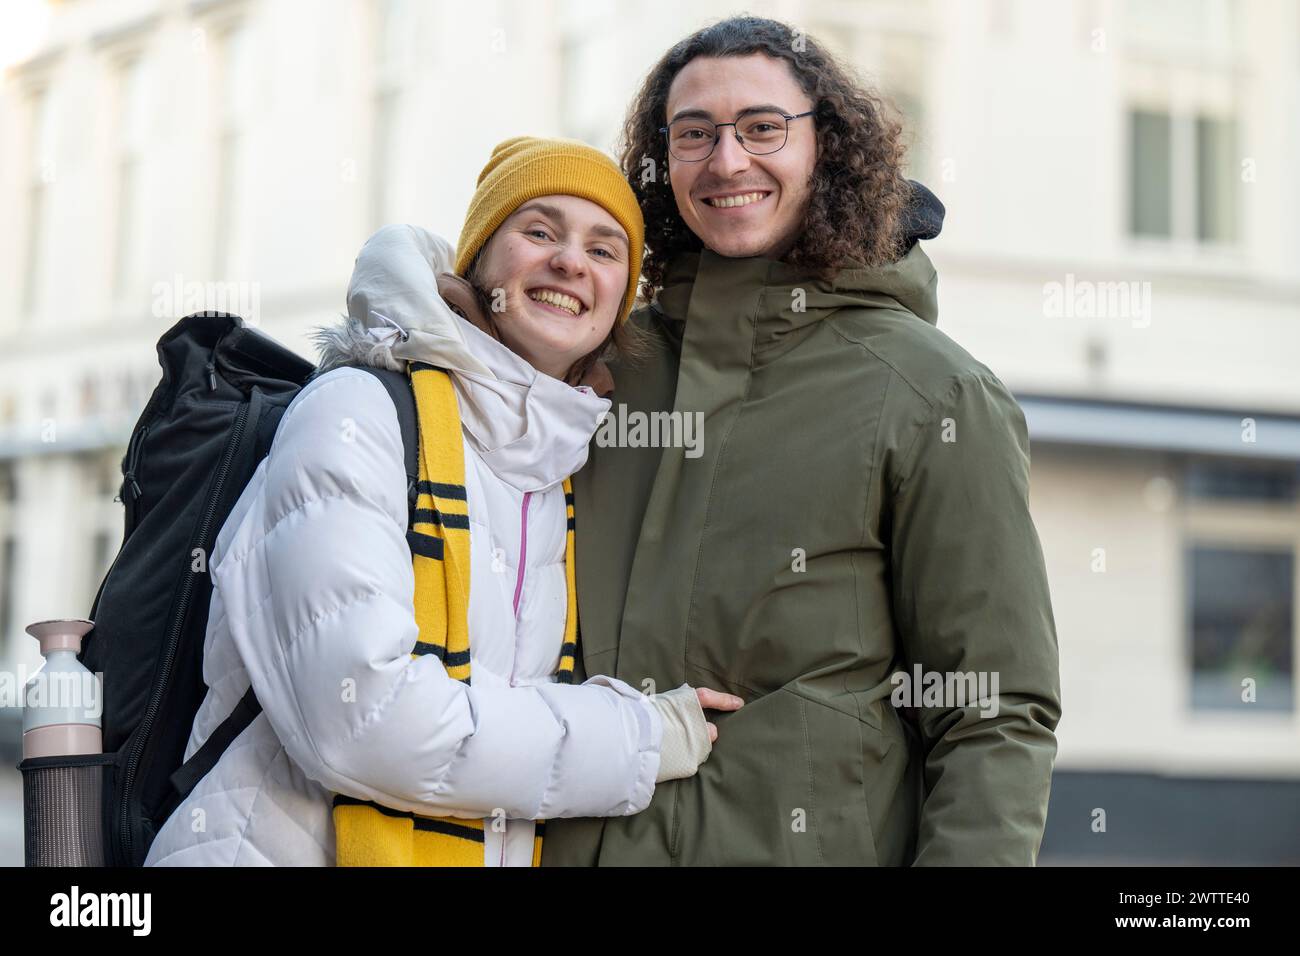 Two friends sharing a joyful moment on a city street. Stock Photo